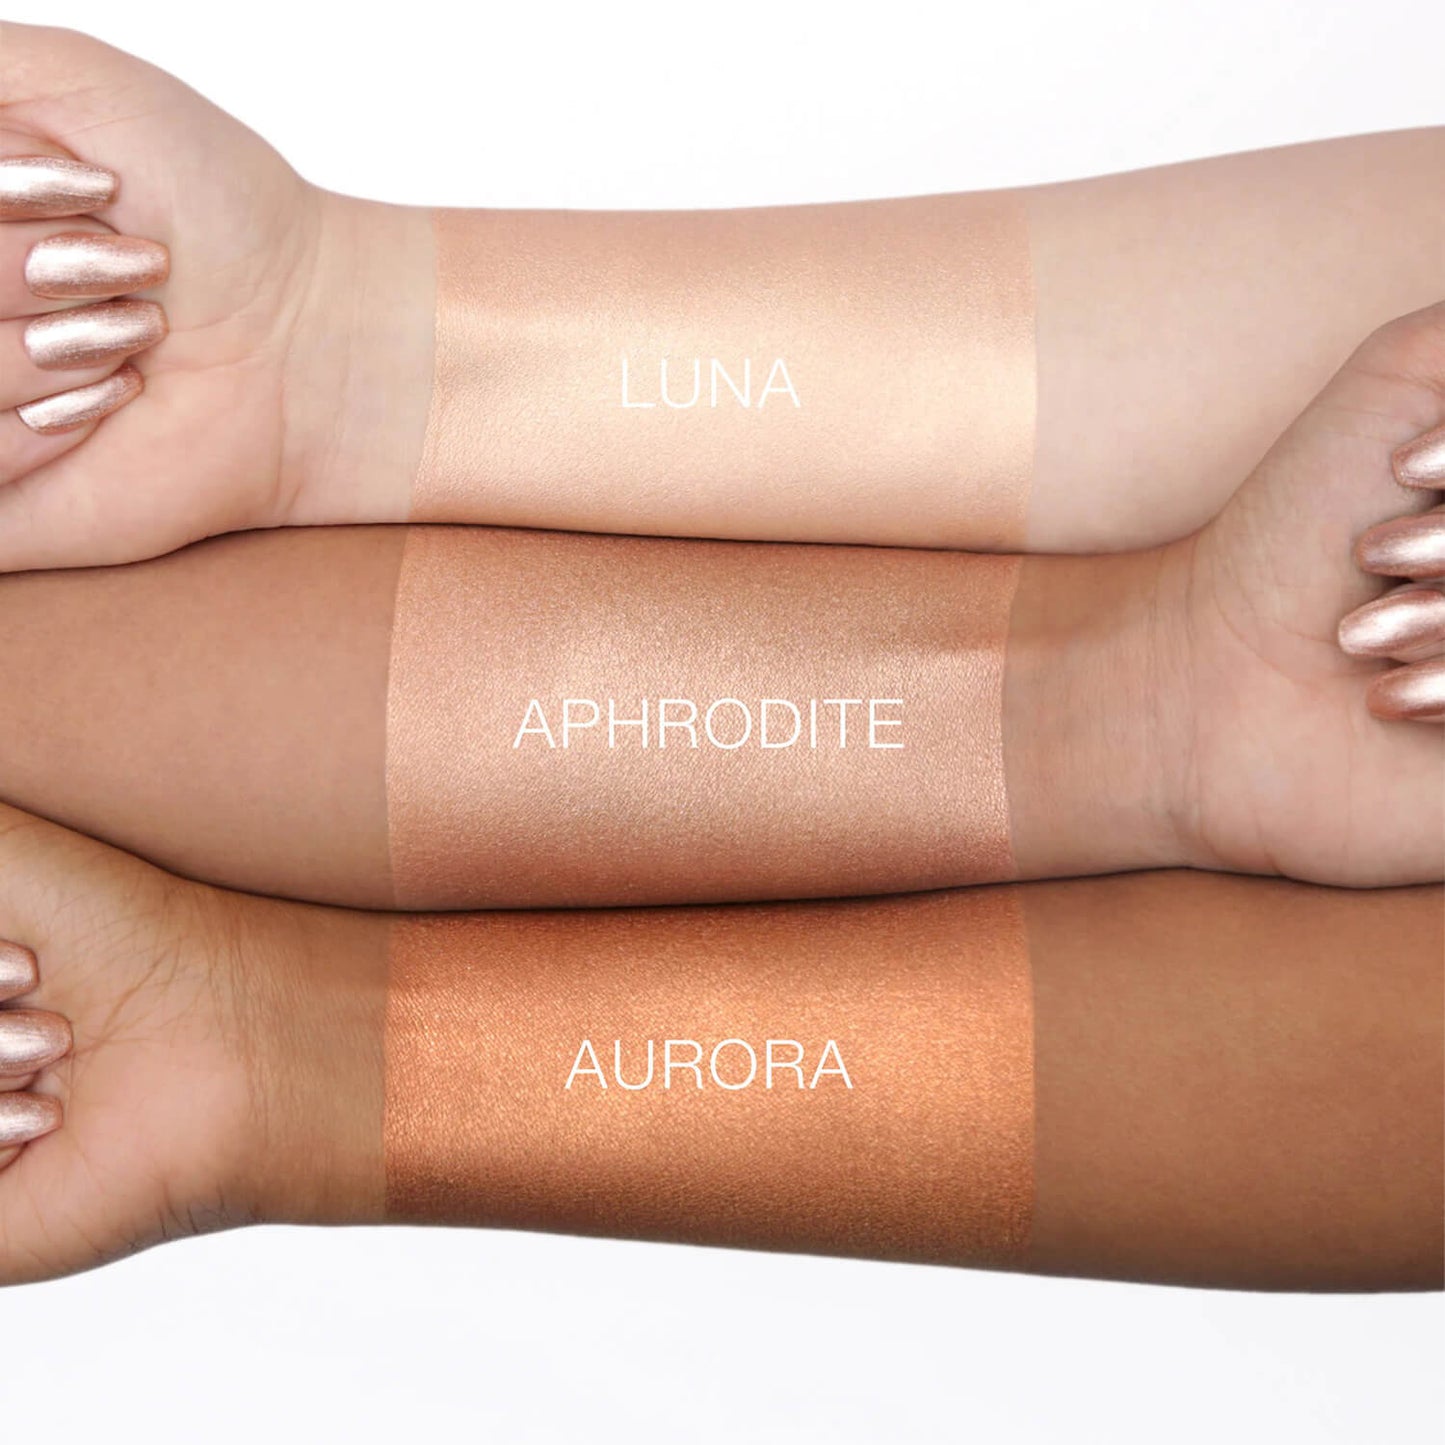 Huda Beauty All Over Body Highlighter swatch available at Heygirl.pk in Karachi, Lahore, Islamabad in Pakistan